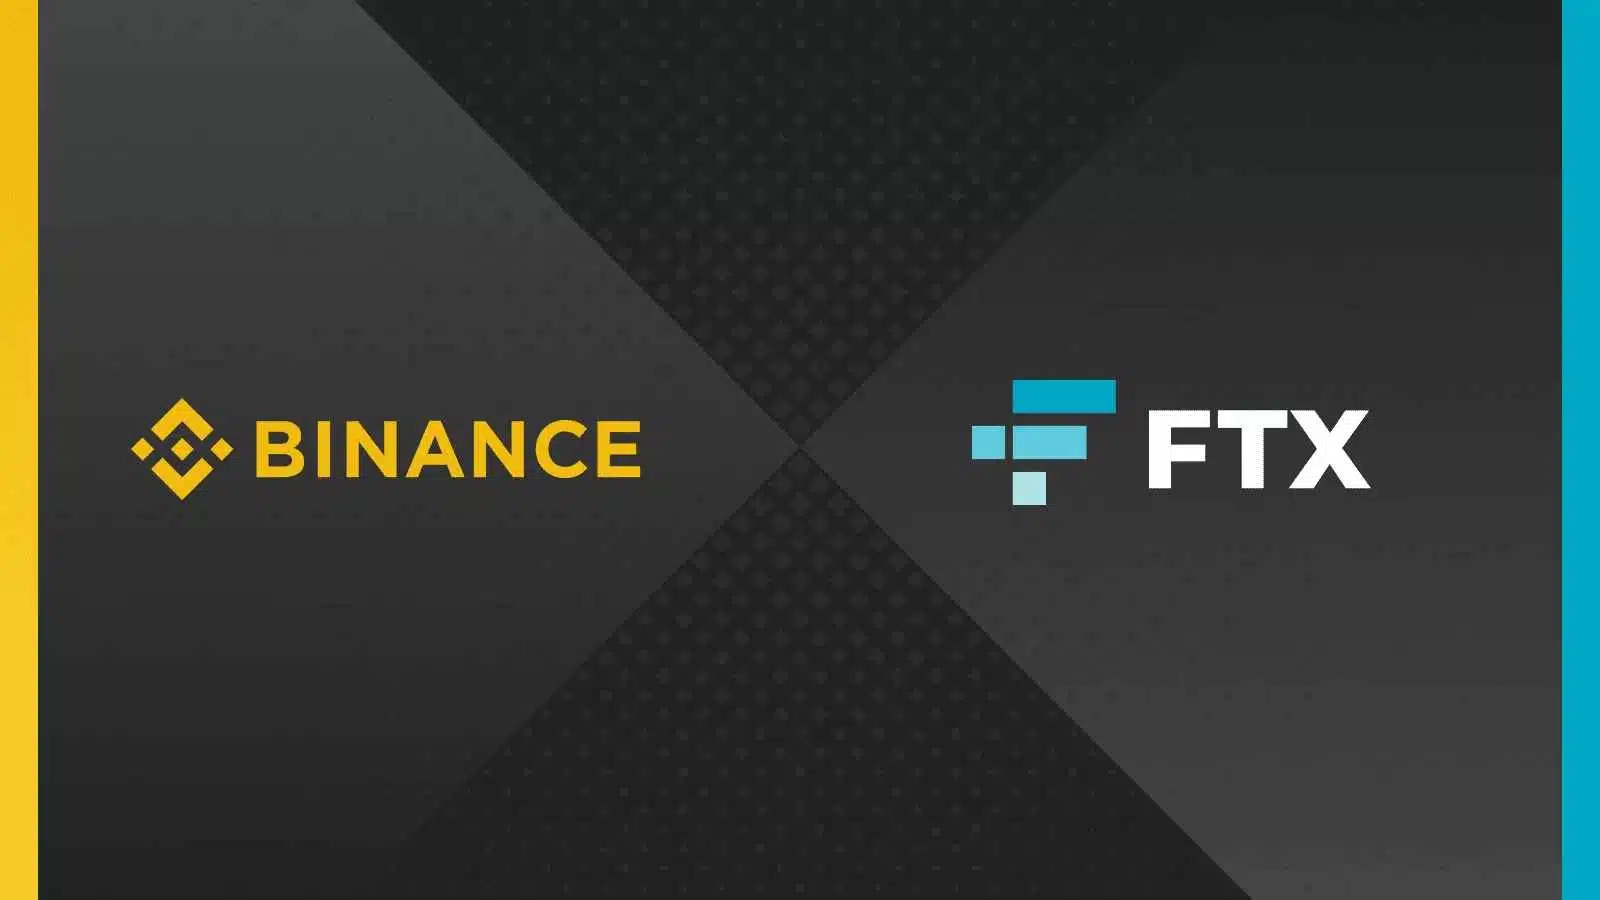 Crypto giant Binance acquires rival FTX